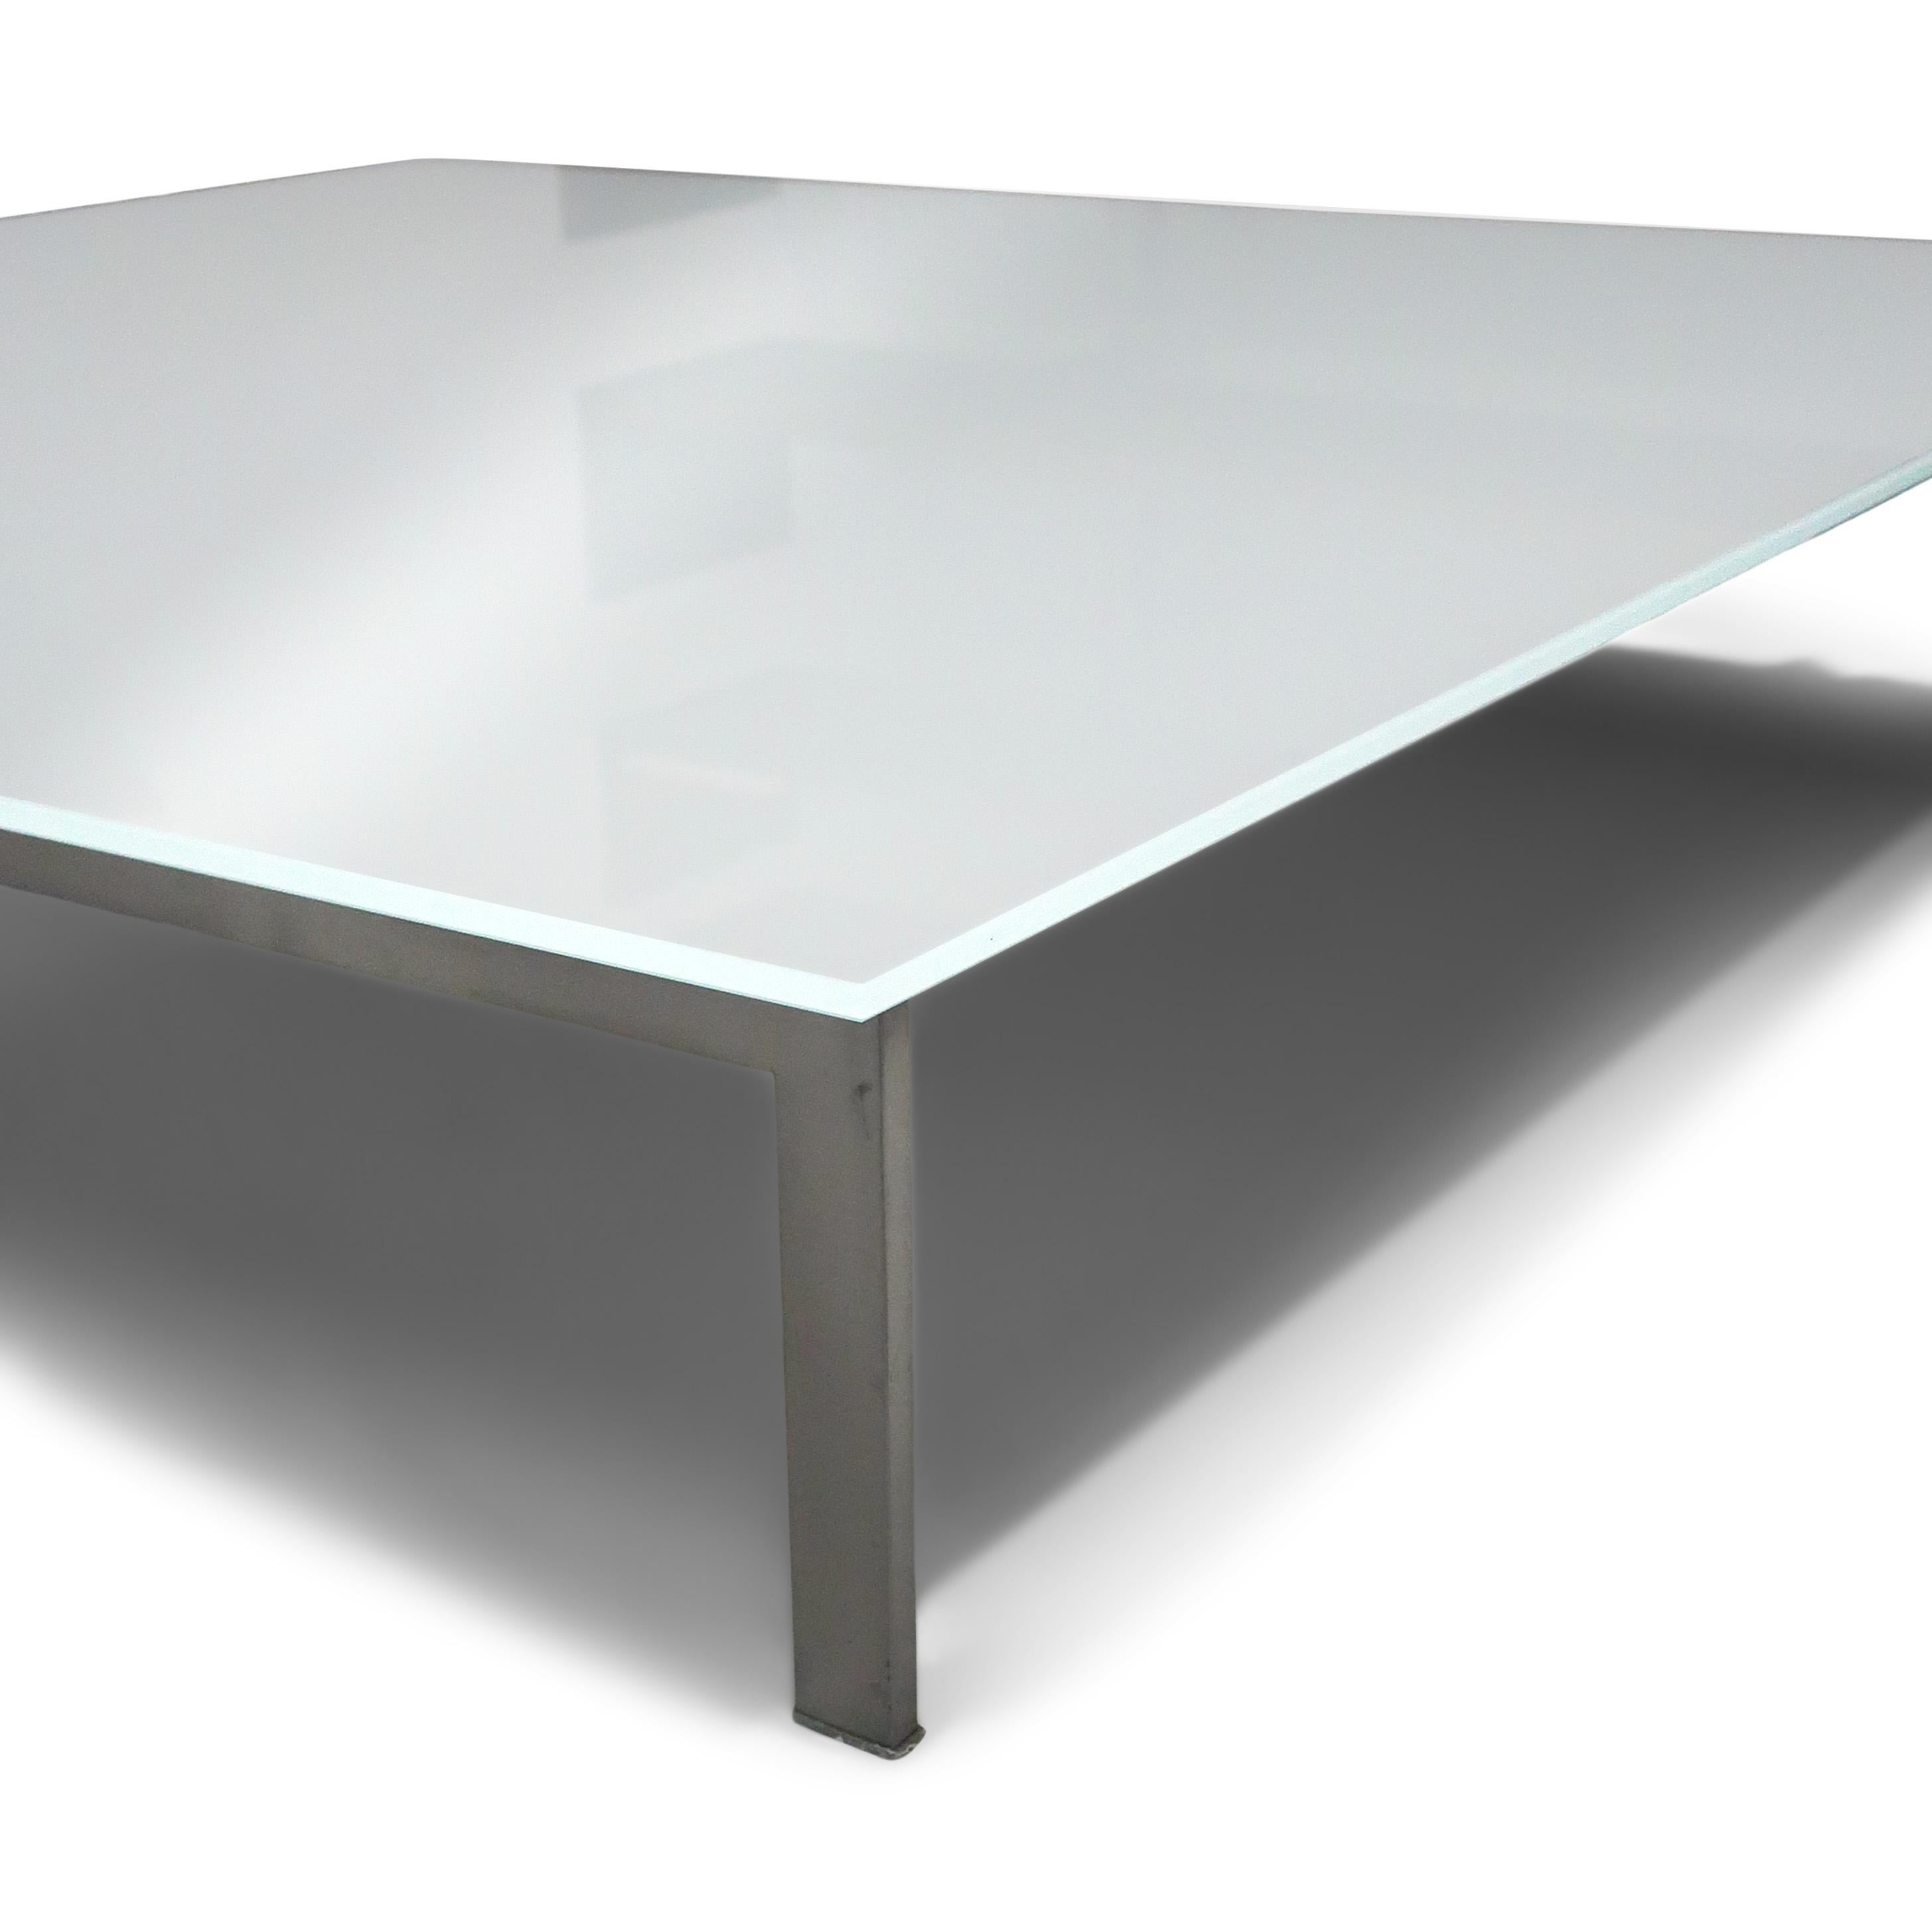 Contemporary White Metro 2 Cocktail Table by Piero Lissoni for Living Divani For Sale